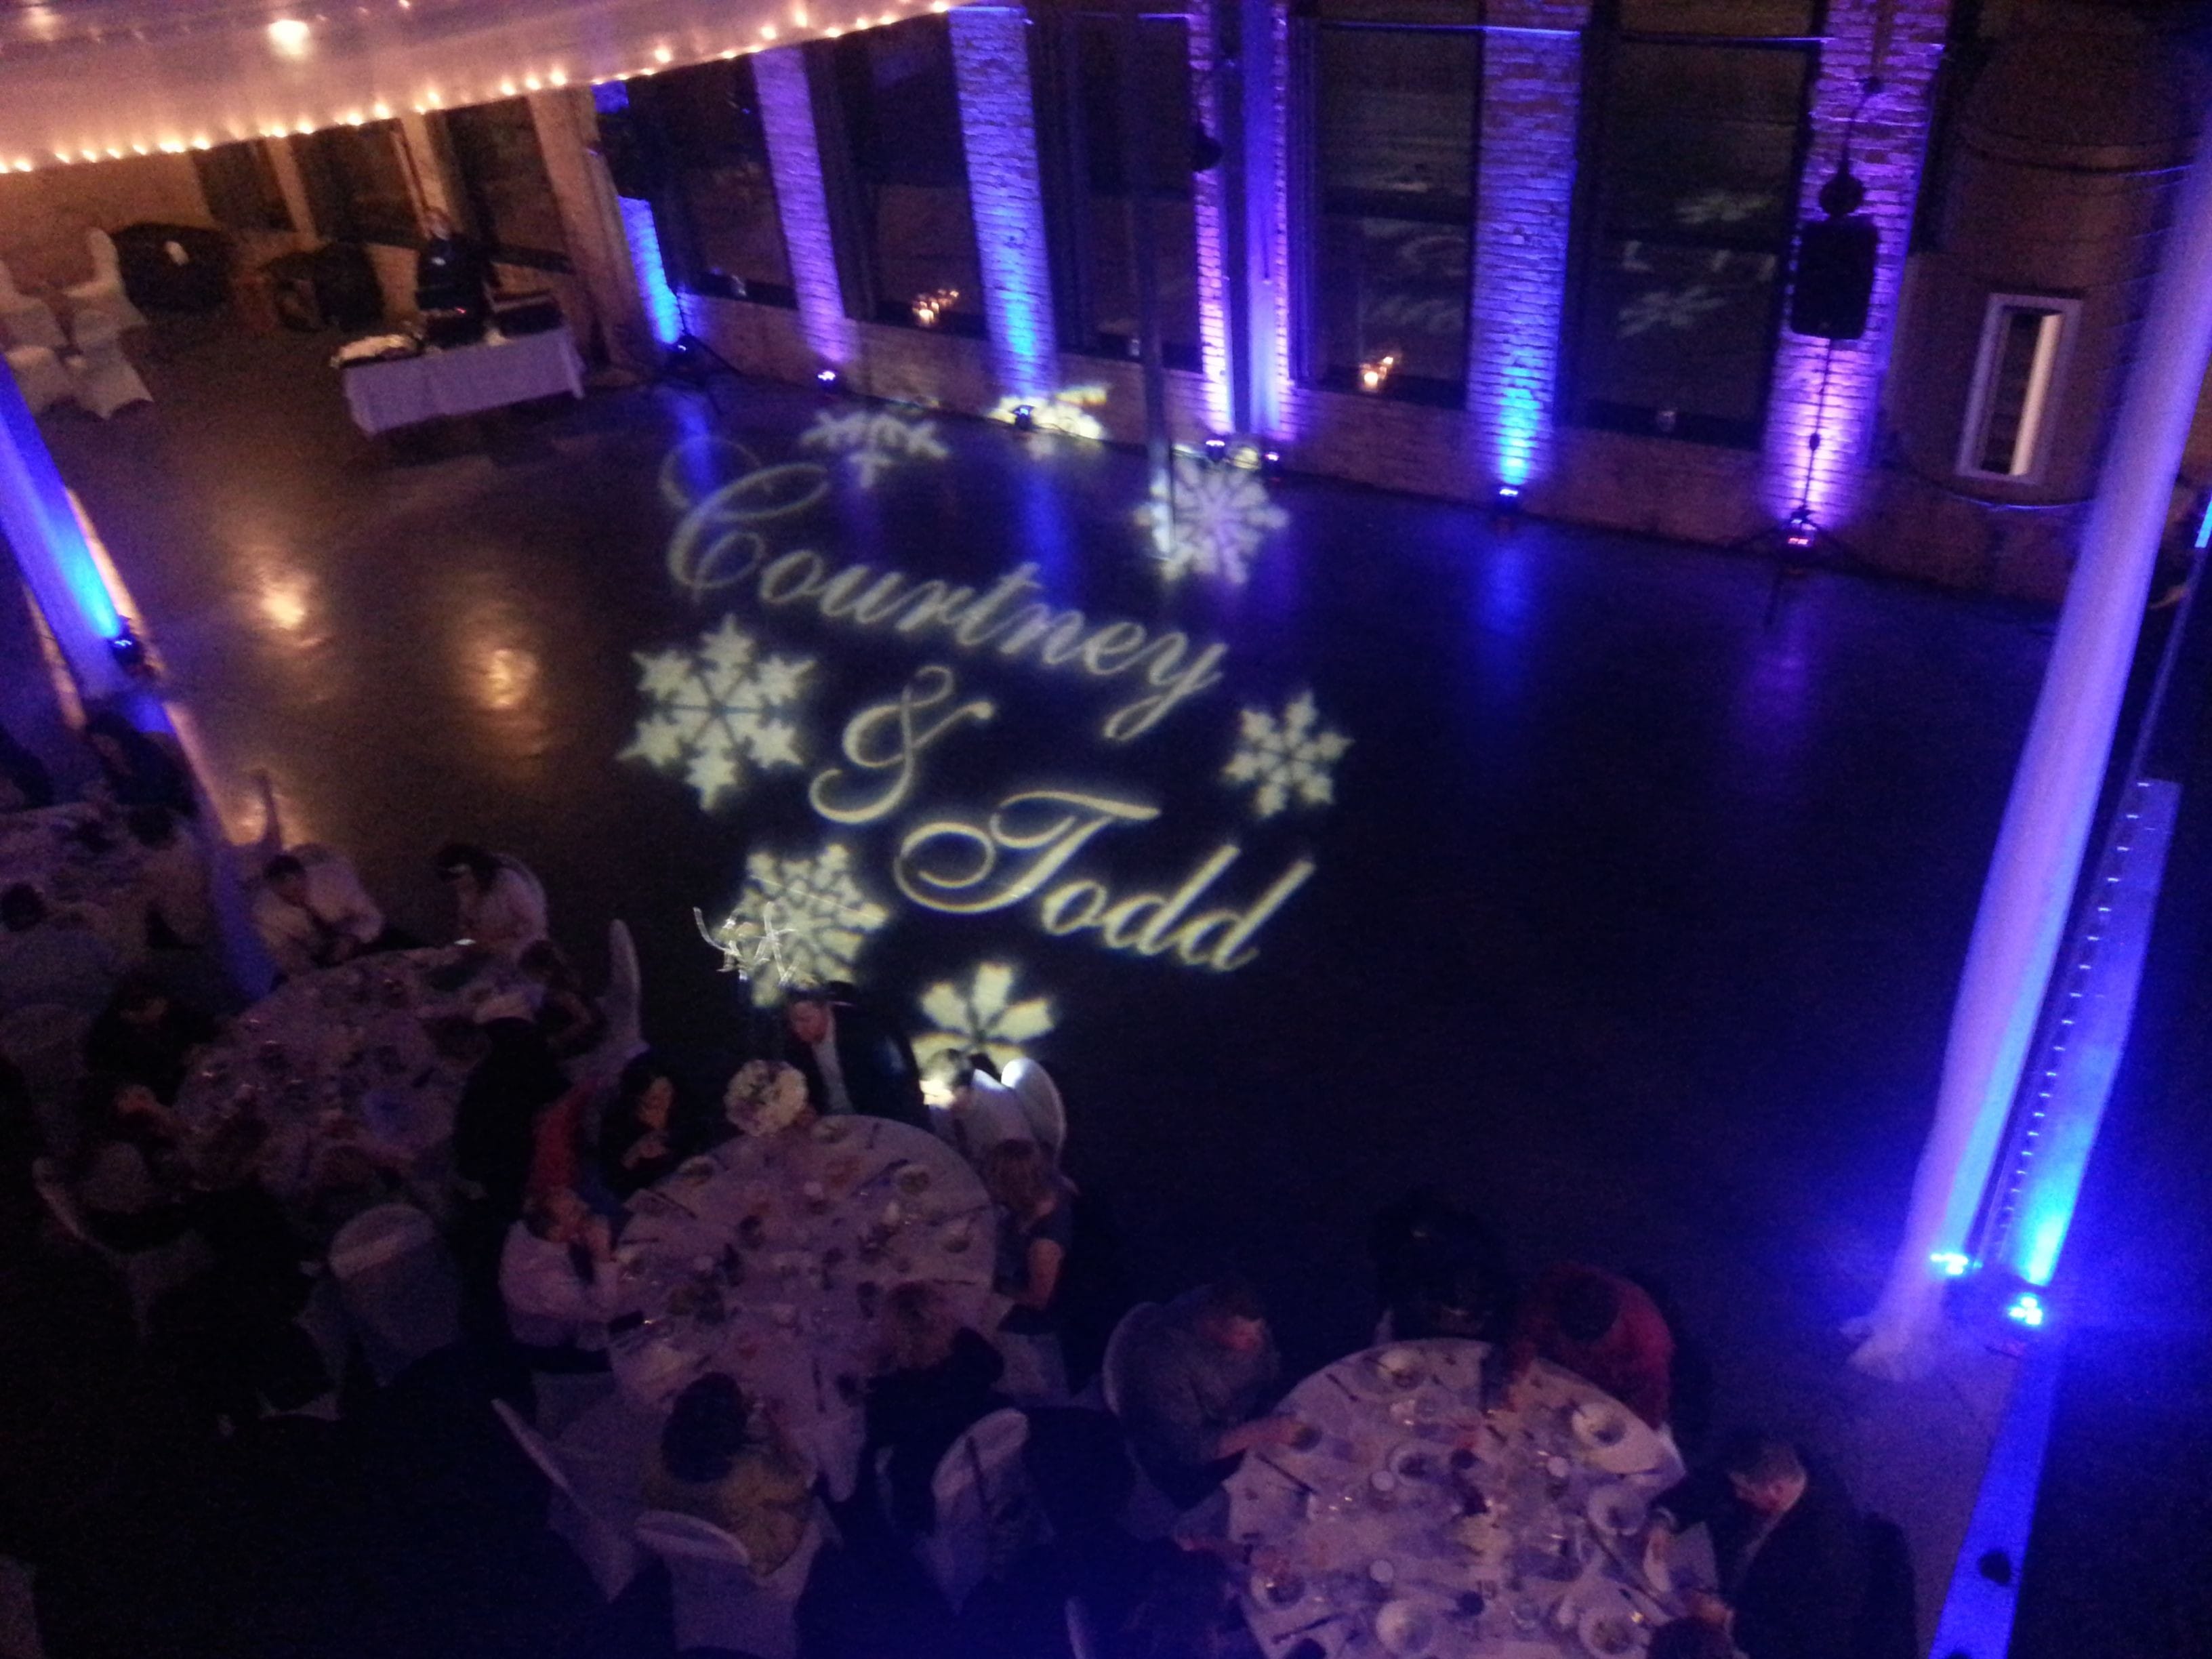 Wedding lighting at Clyde. Up lighting in blue and purple with a monogram.